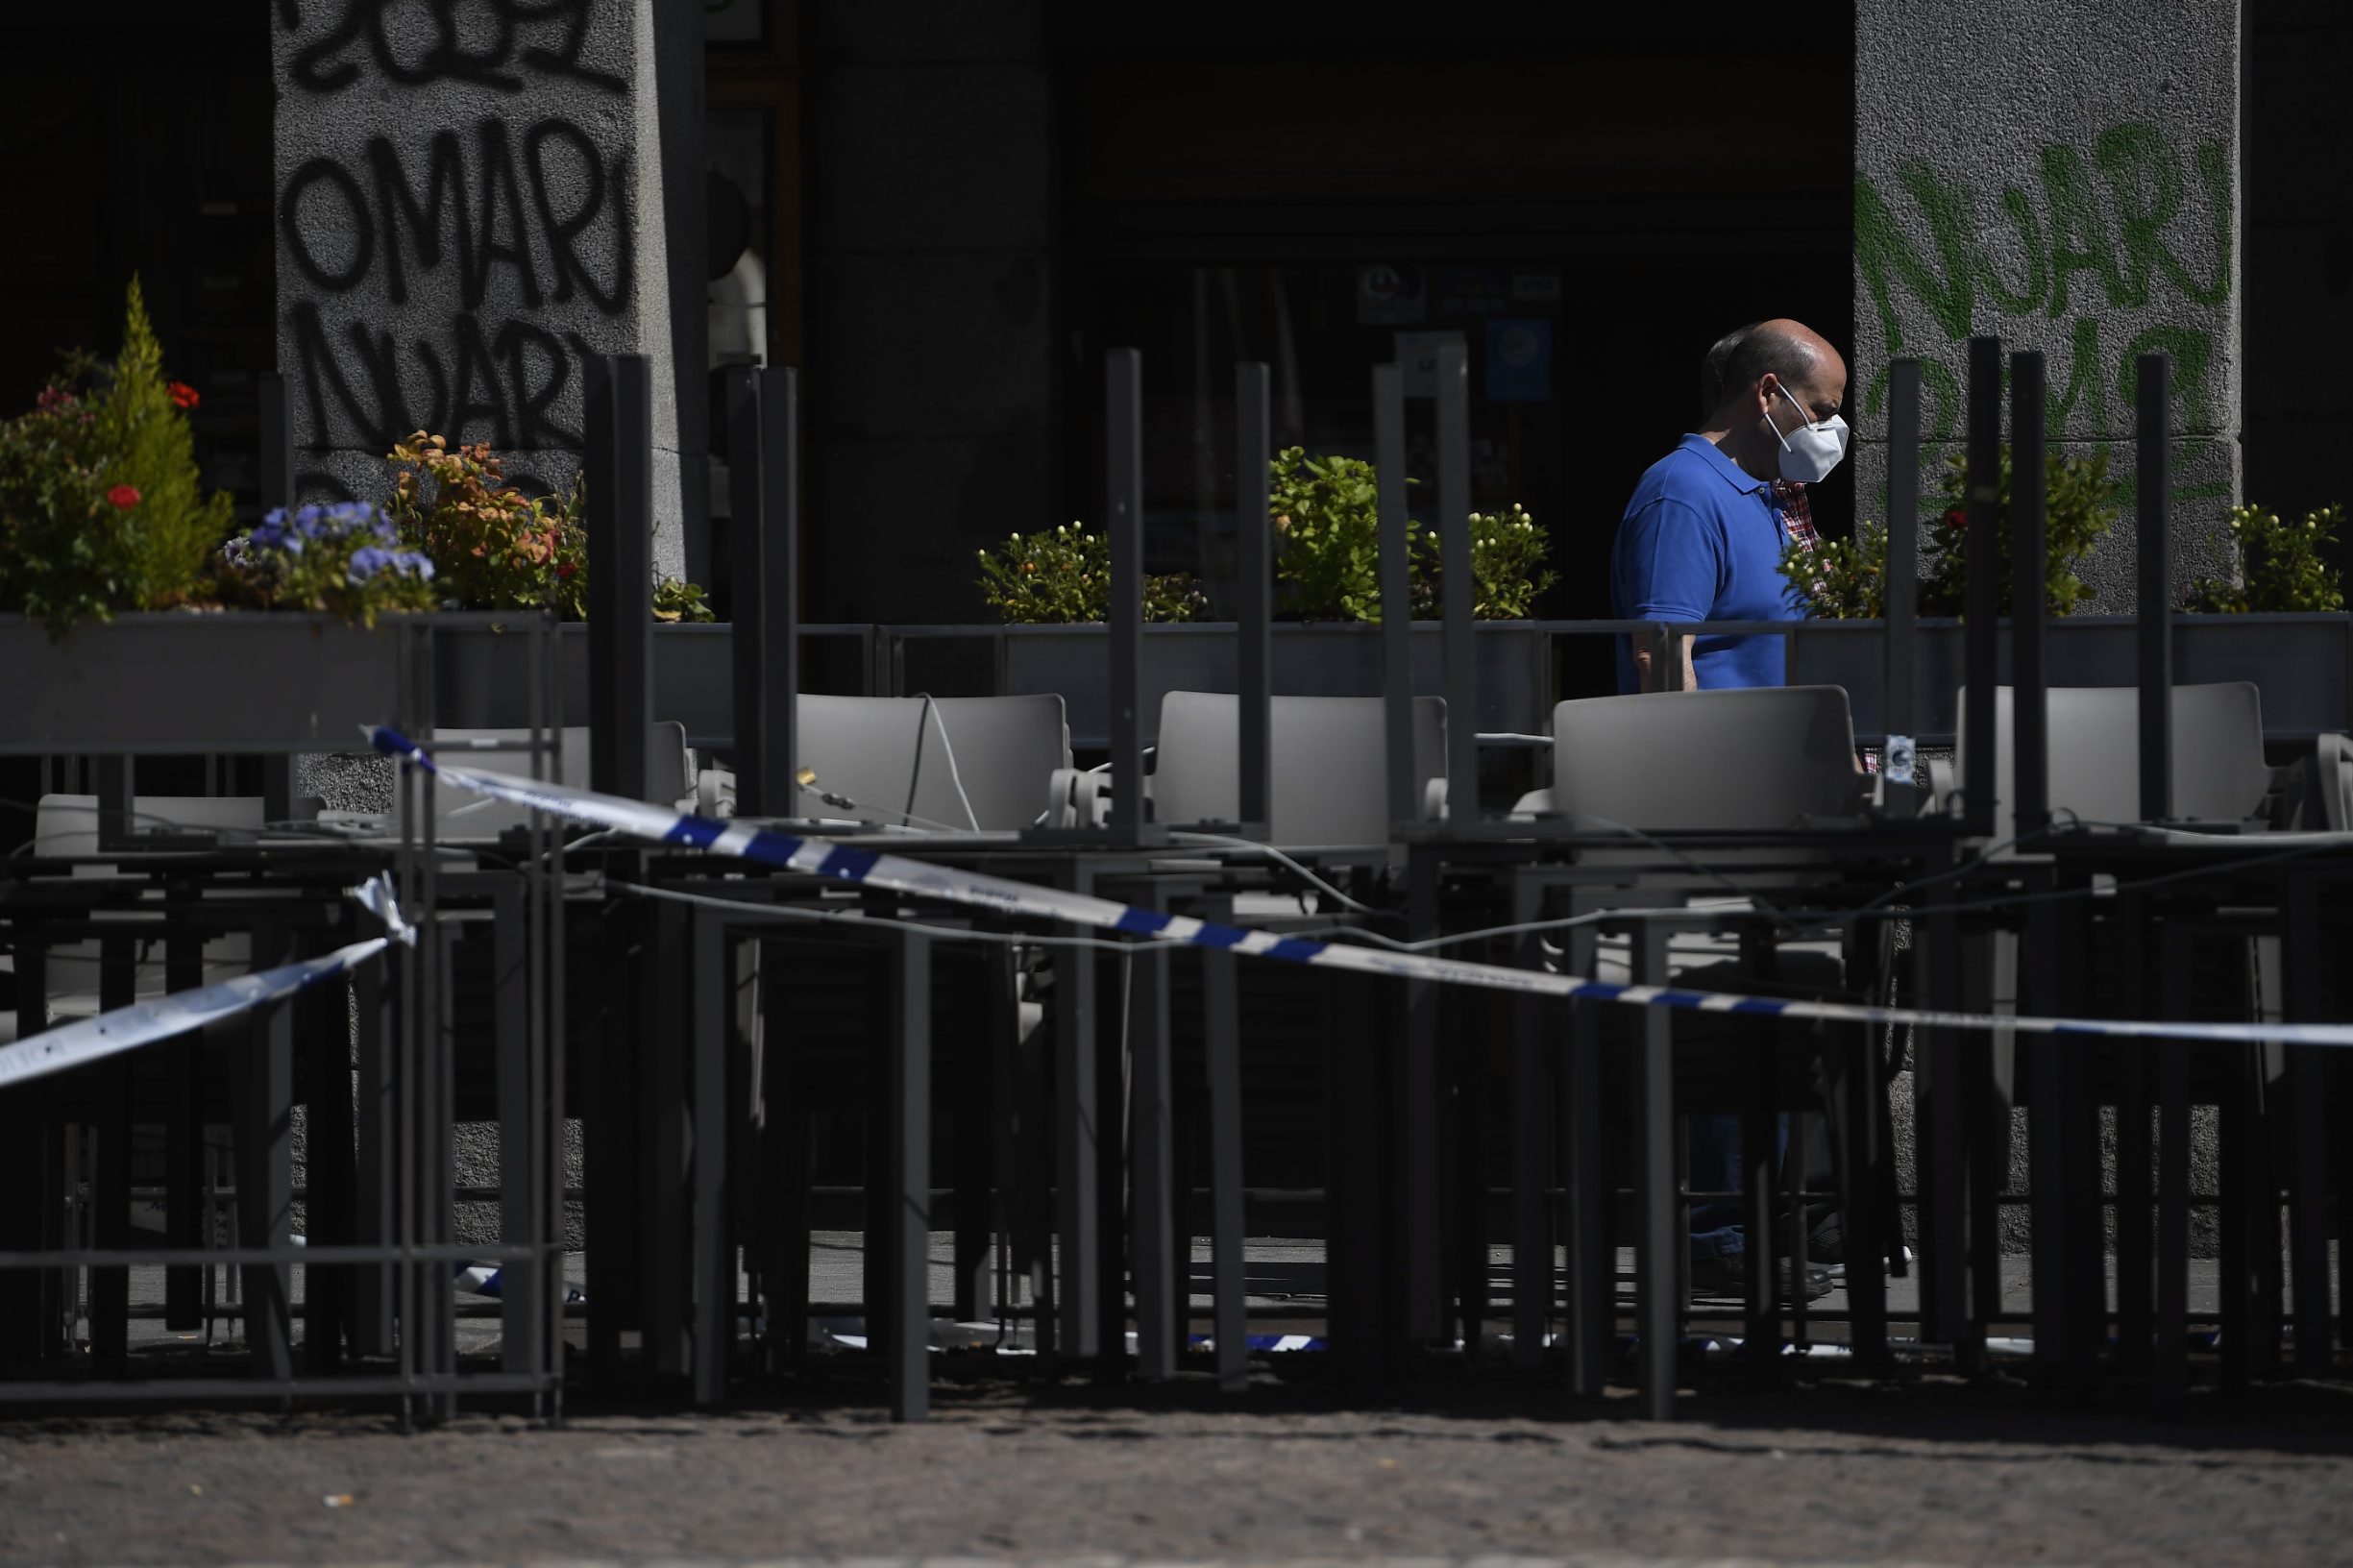 A man prepares a terrace bar at the Plaza Mayor in Madrid on May 25, 2020 as coronavirus lockdown measures will finally be eased for people in Madrid and Barcelona. - The Madrid and Barcelona regions, the most populated in the country, and a large part of Castile-Leon in the northwest are moving into the first phase of Spain's four-phase deconfinement programme, following what has been one of the strictest lockdowns in the world. (Photo by PIERRE-PHILIPPE MARCOU / AFP)